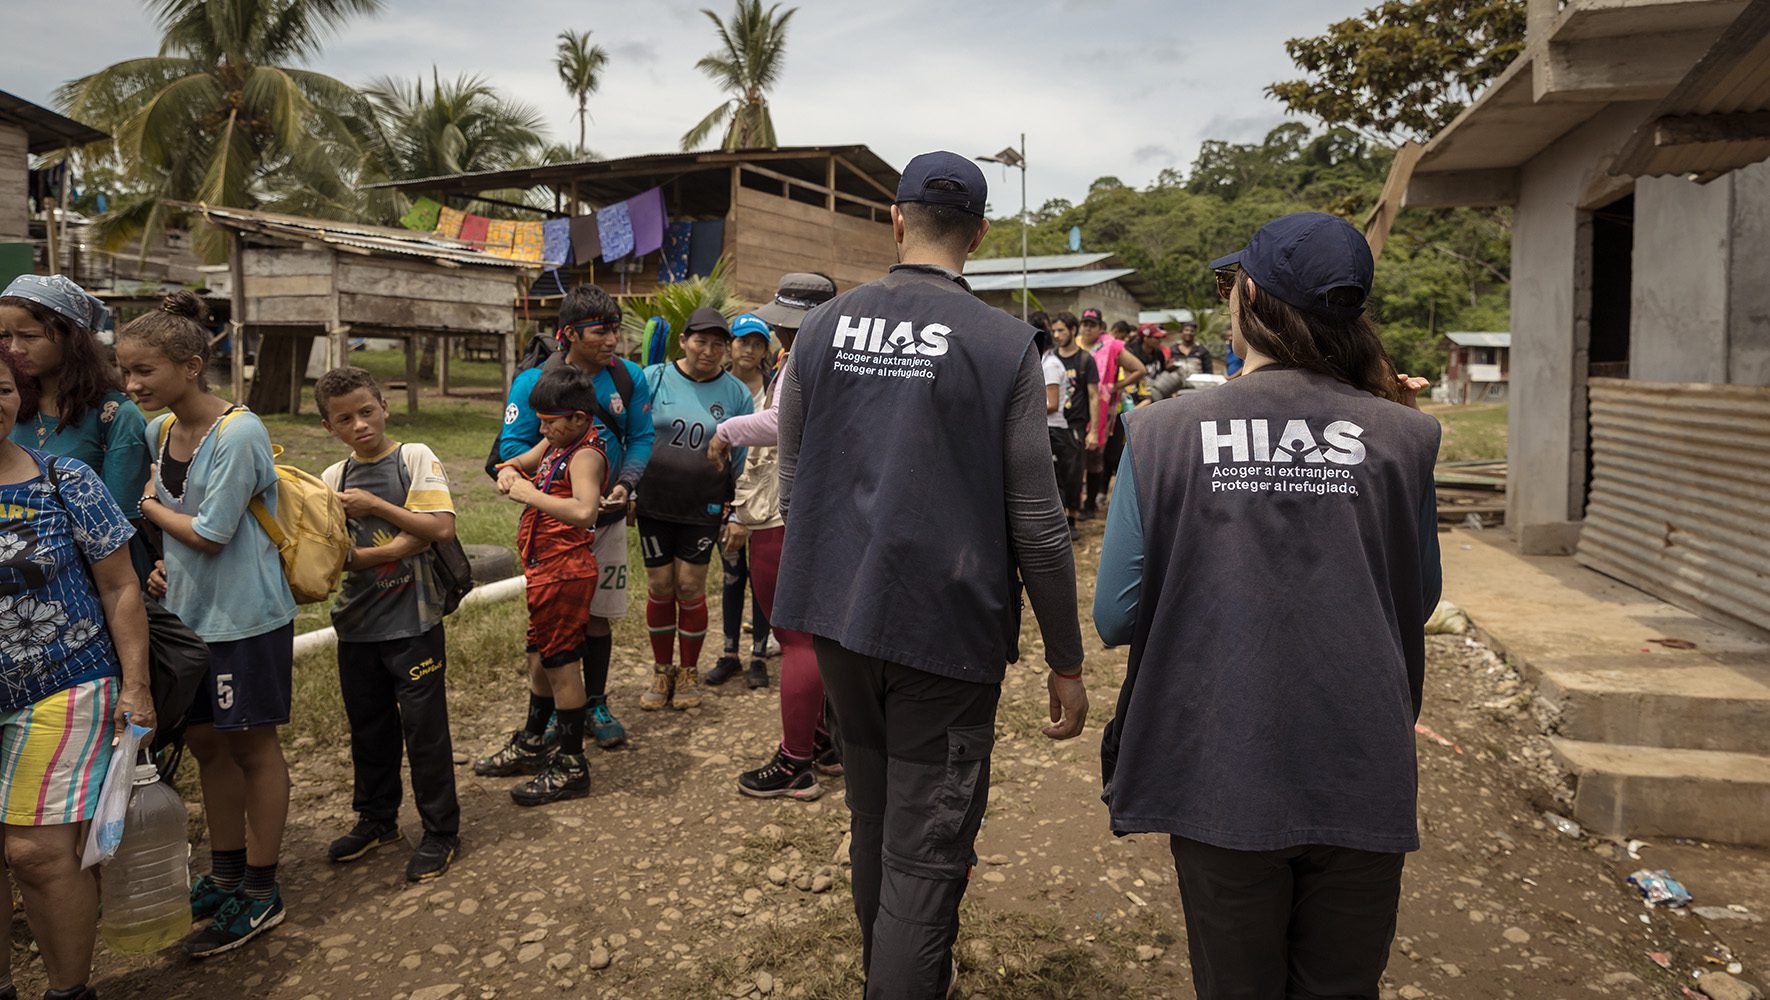 HIAS staff on duty in Bajo Chiquito, an embera wounaan indigenous community and the first place migrants arrive once they leave the Darien Gap. Bajo Chiquito, Darien province, Panama. August 2, 2023.